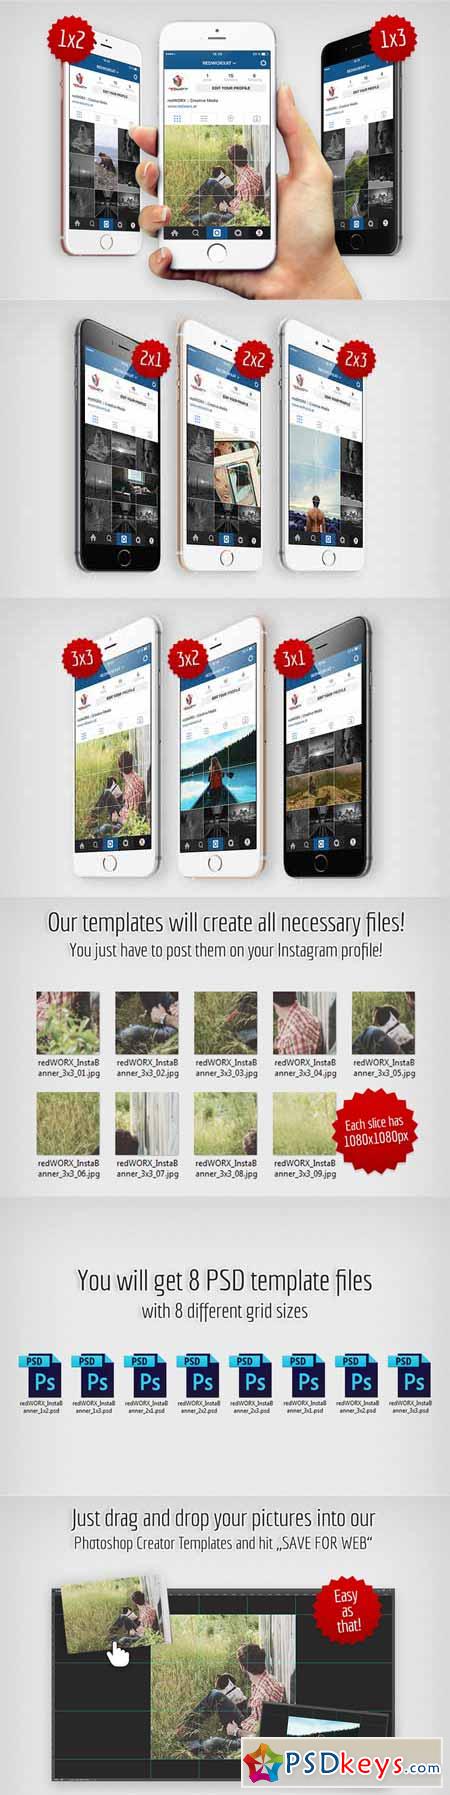 8 Creator Templates for InstaBanners 605416